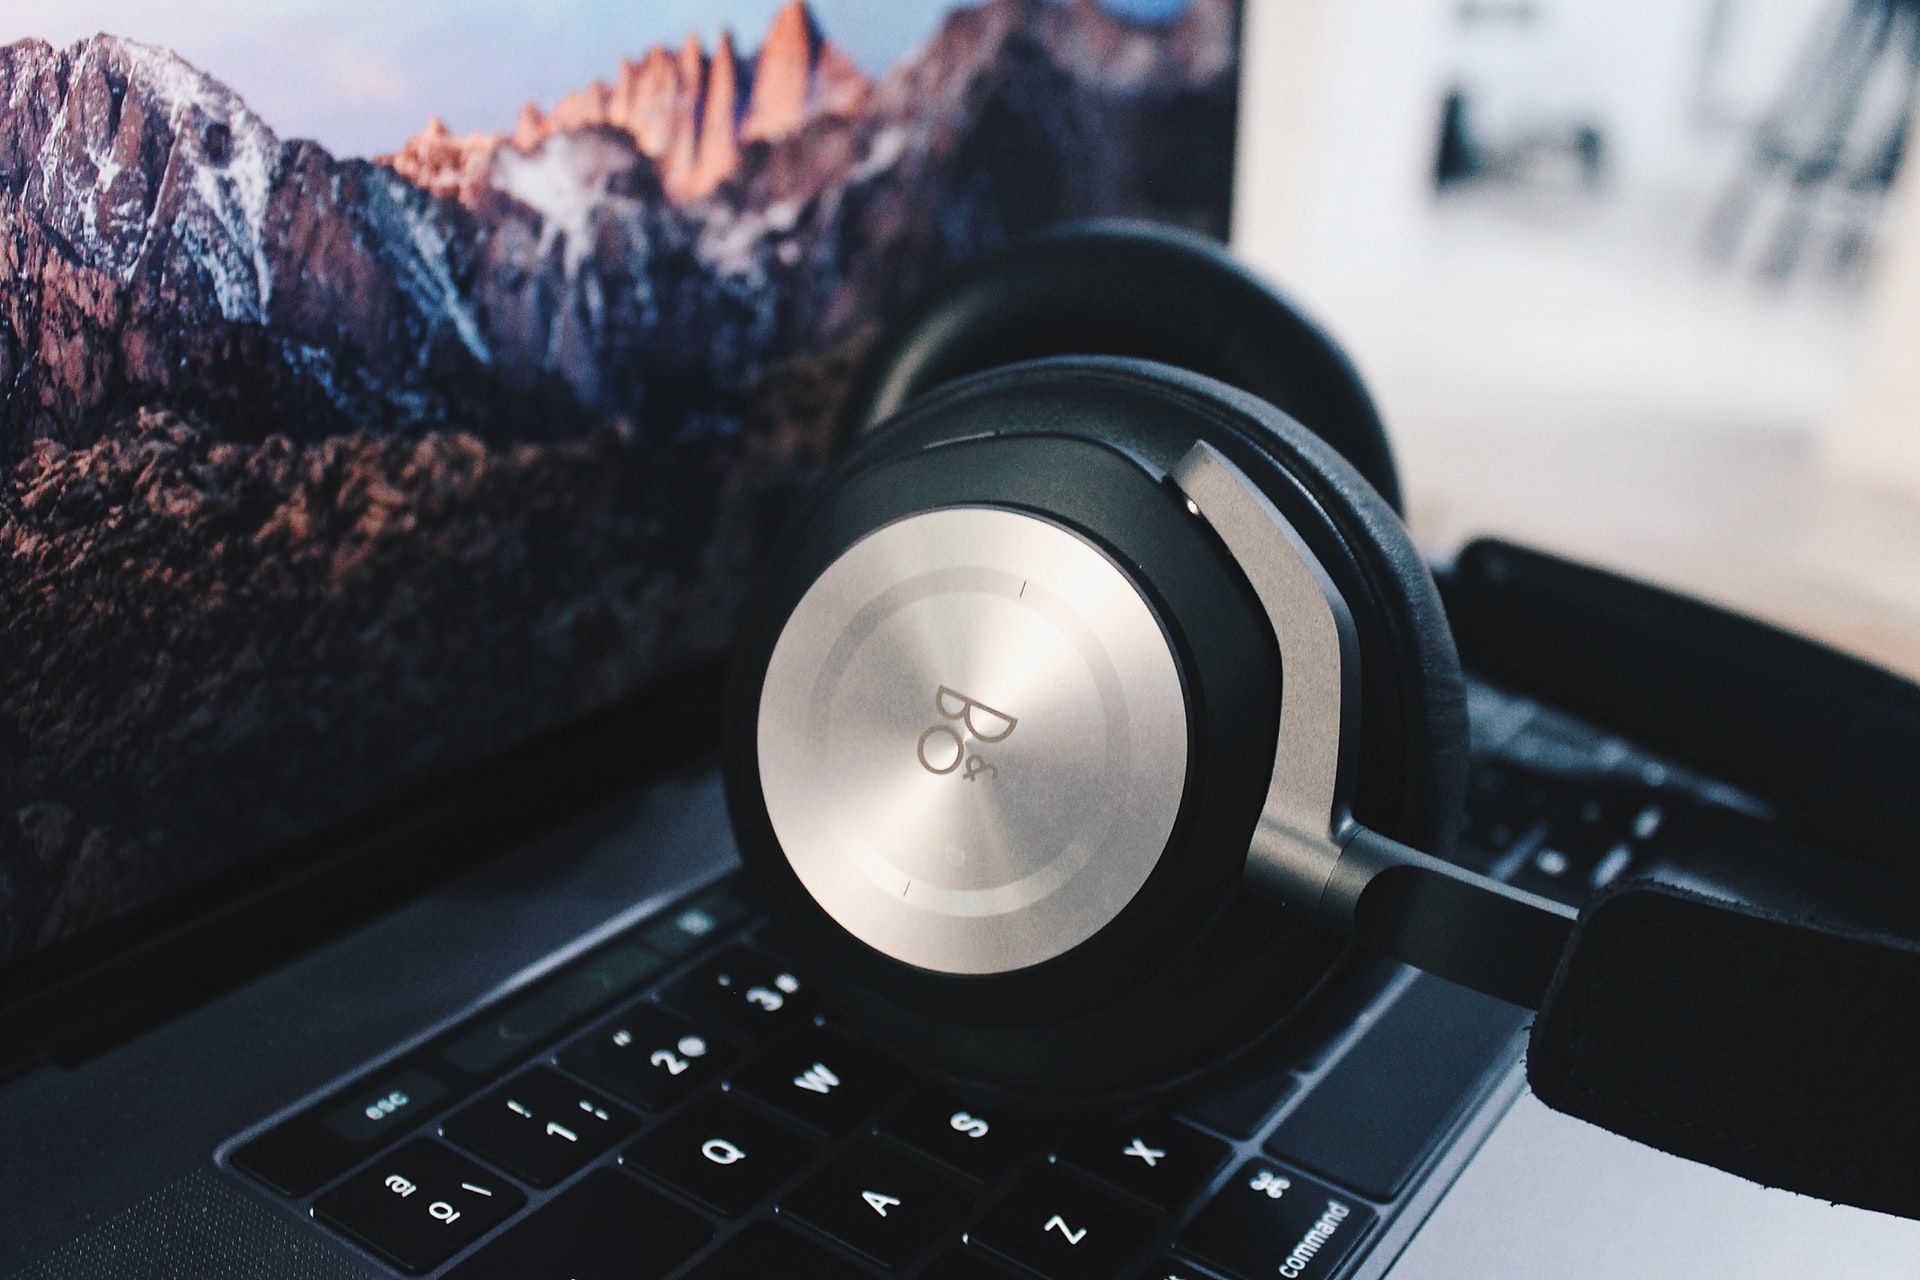 Beoplay H95 on a laptop